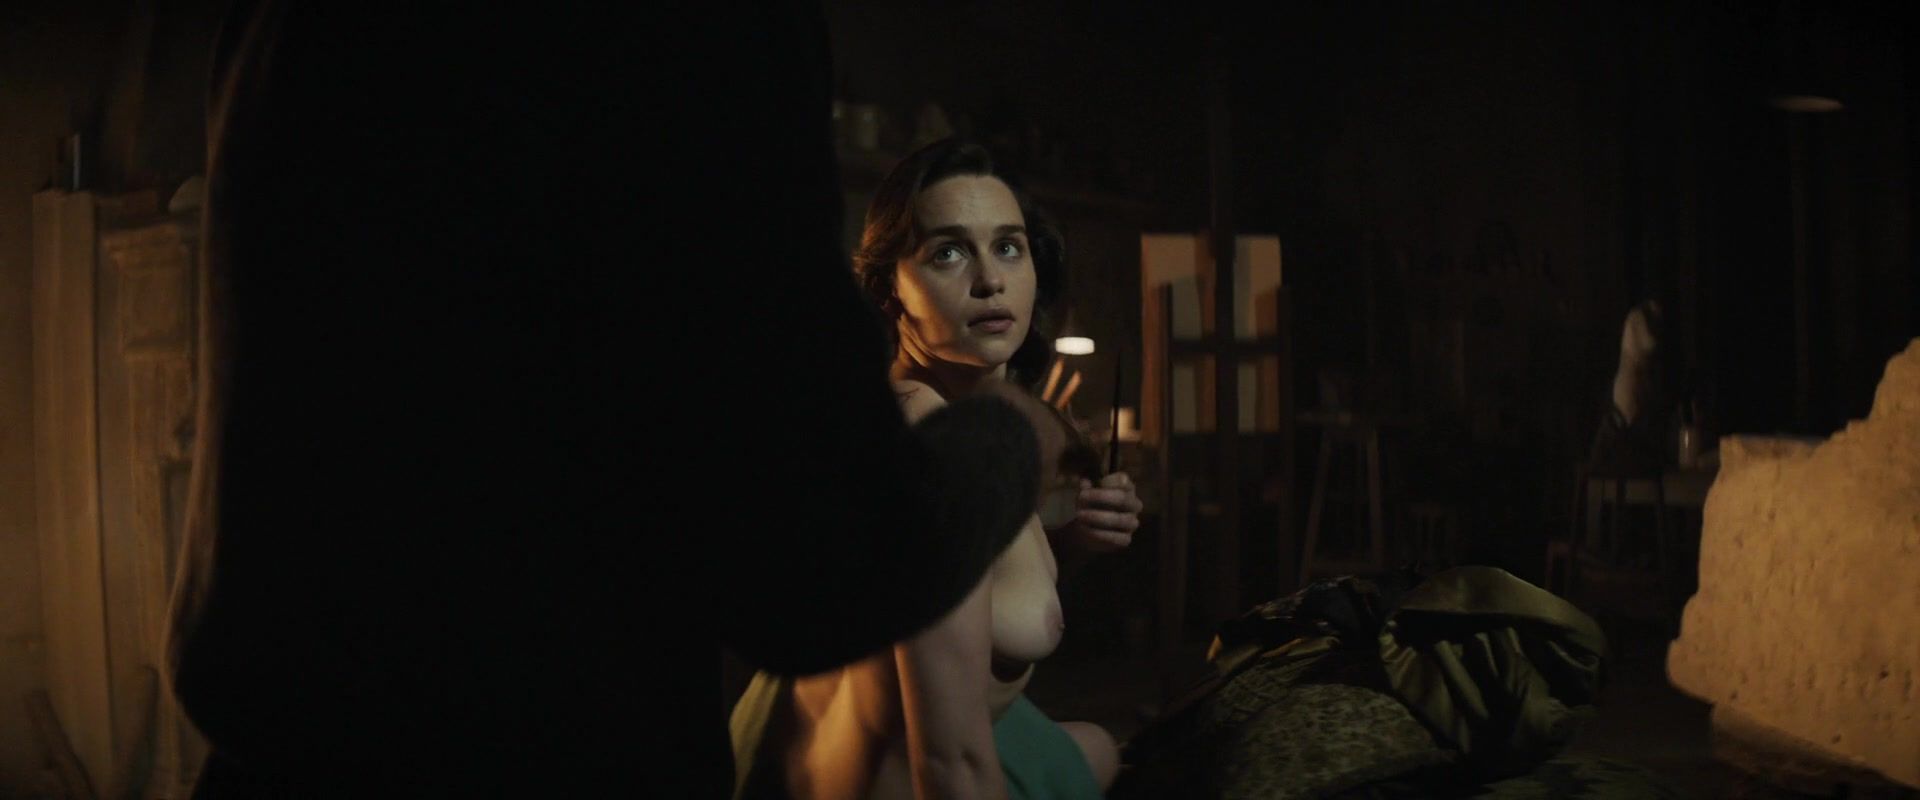 DTVideo Naked Emilia Clarke in topless scene of the movie "Voice from the Stone" | Released in 2017 Cumswallow